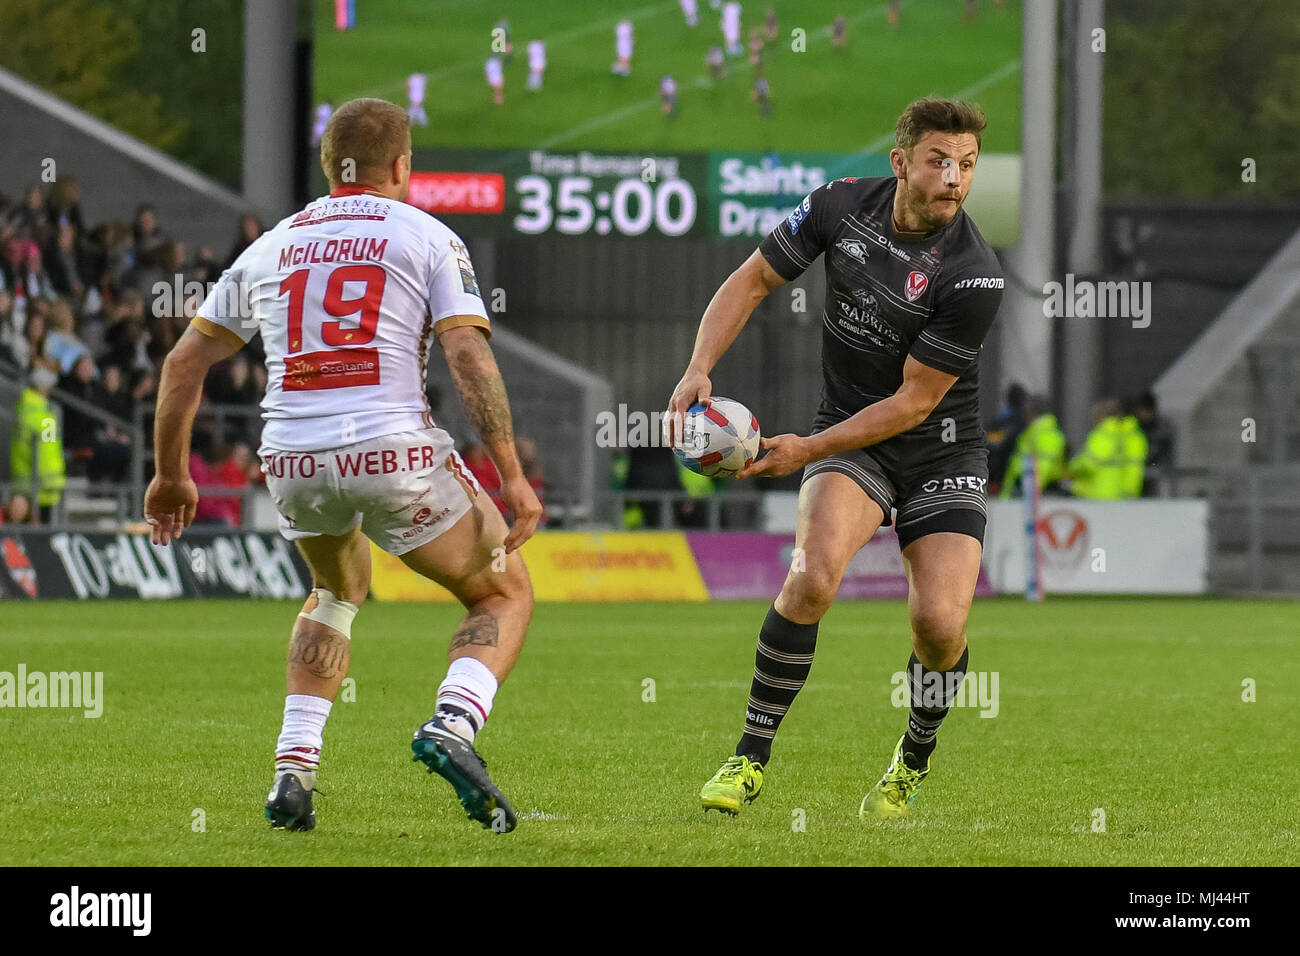 3rd May 2018, Totally Wicked Stadium, St Helens, England; Betfred Super League rugby, Round 14, St Helens v Catalans Dragons; Jon Wilkin of St Helens looks to pass before the tacke from Micky McIlroum of Catalans Dragsons Stock Photo